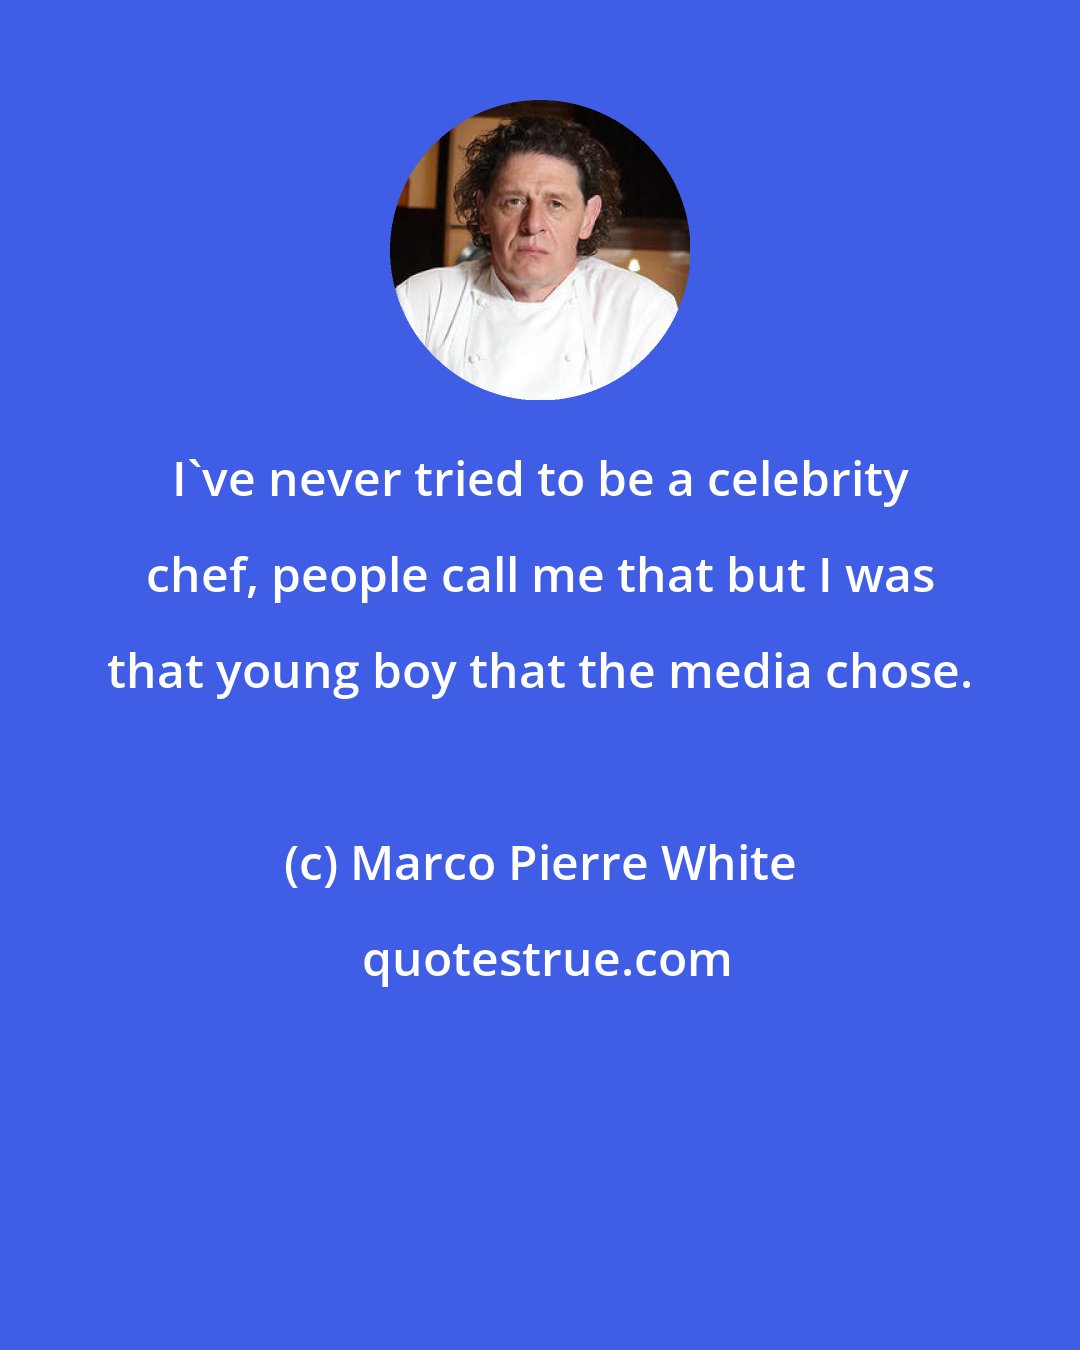 Marco Pierre White: I've never tried to be a celebrity chef, people call me that but I was that young boy that the media chose.